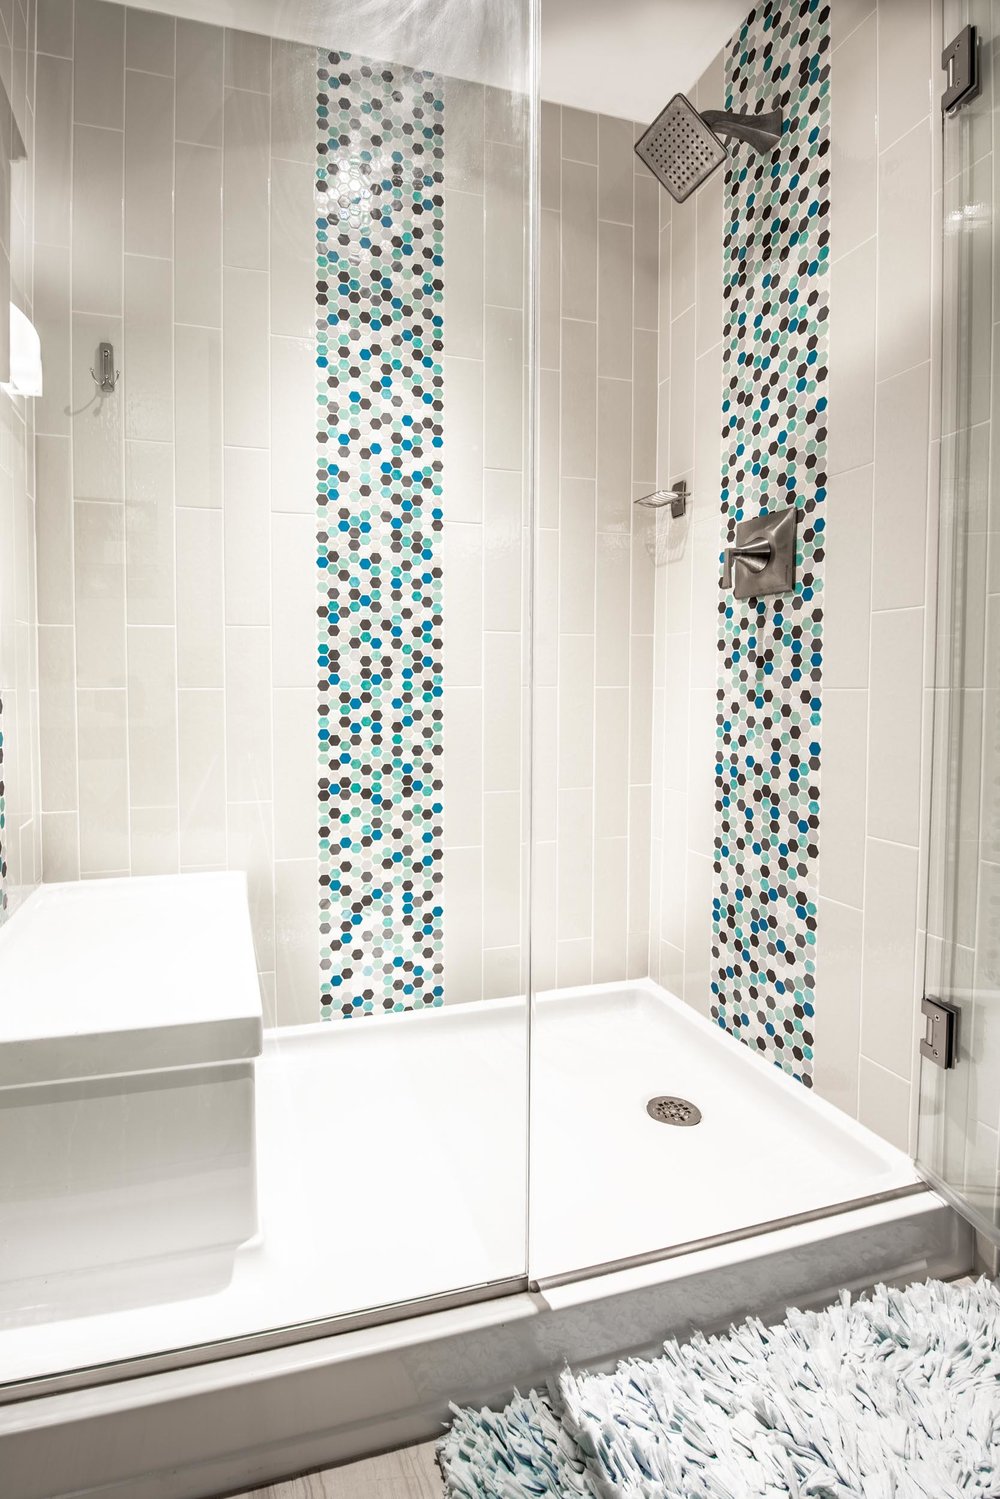 How To Choose Shower Tile When, How To Choose Tile For Bathroom Remodel